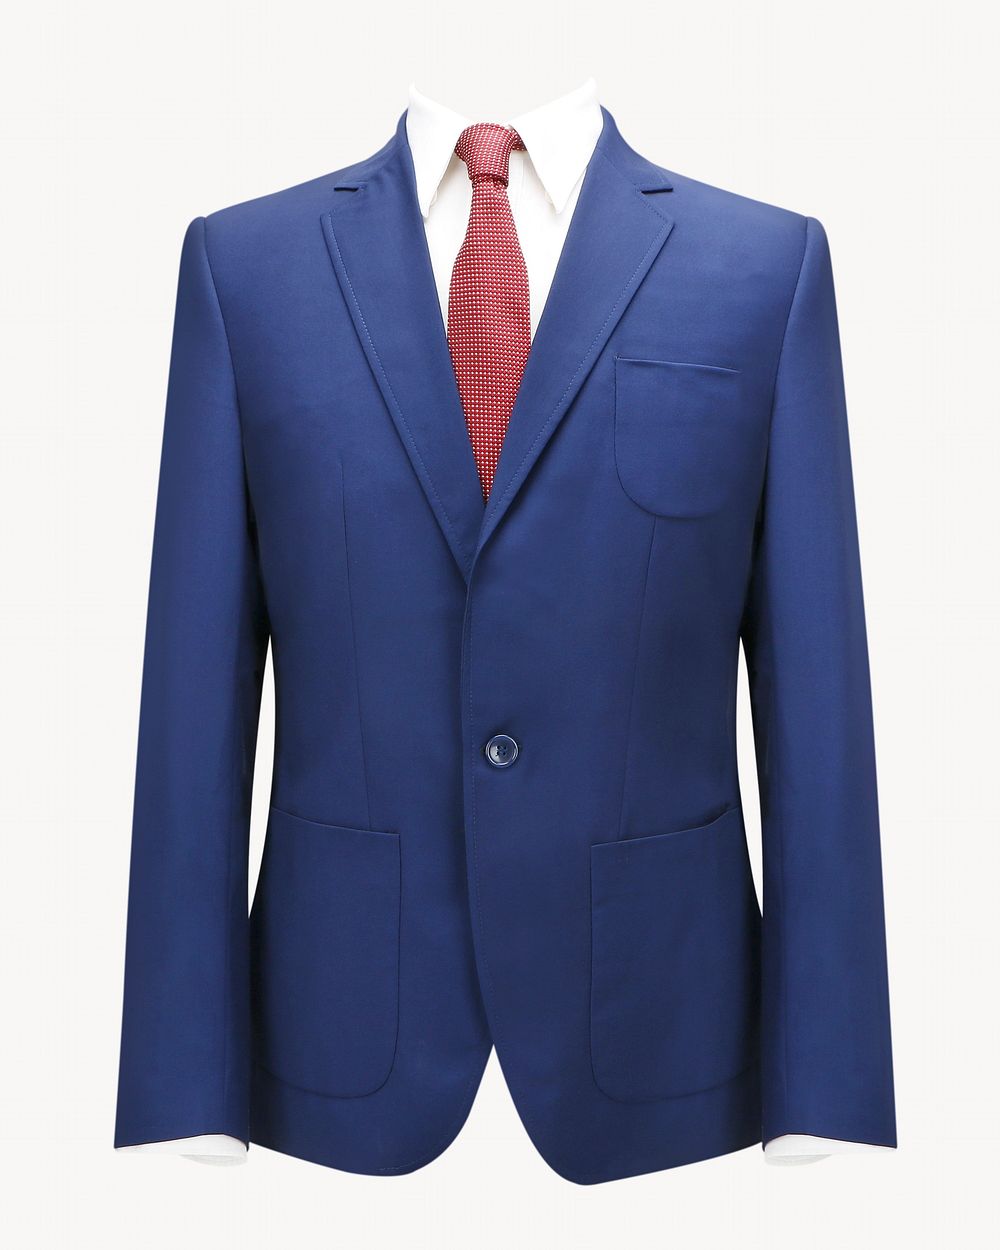 Men's business suit, apparel isolated image